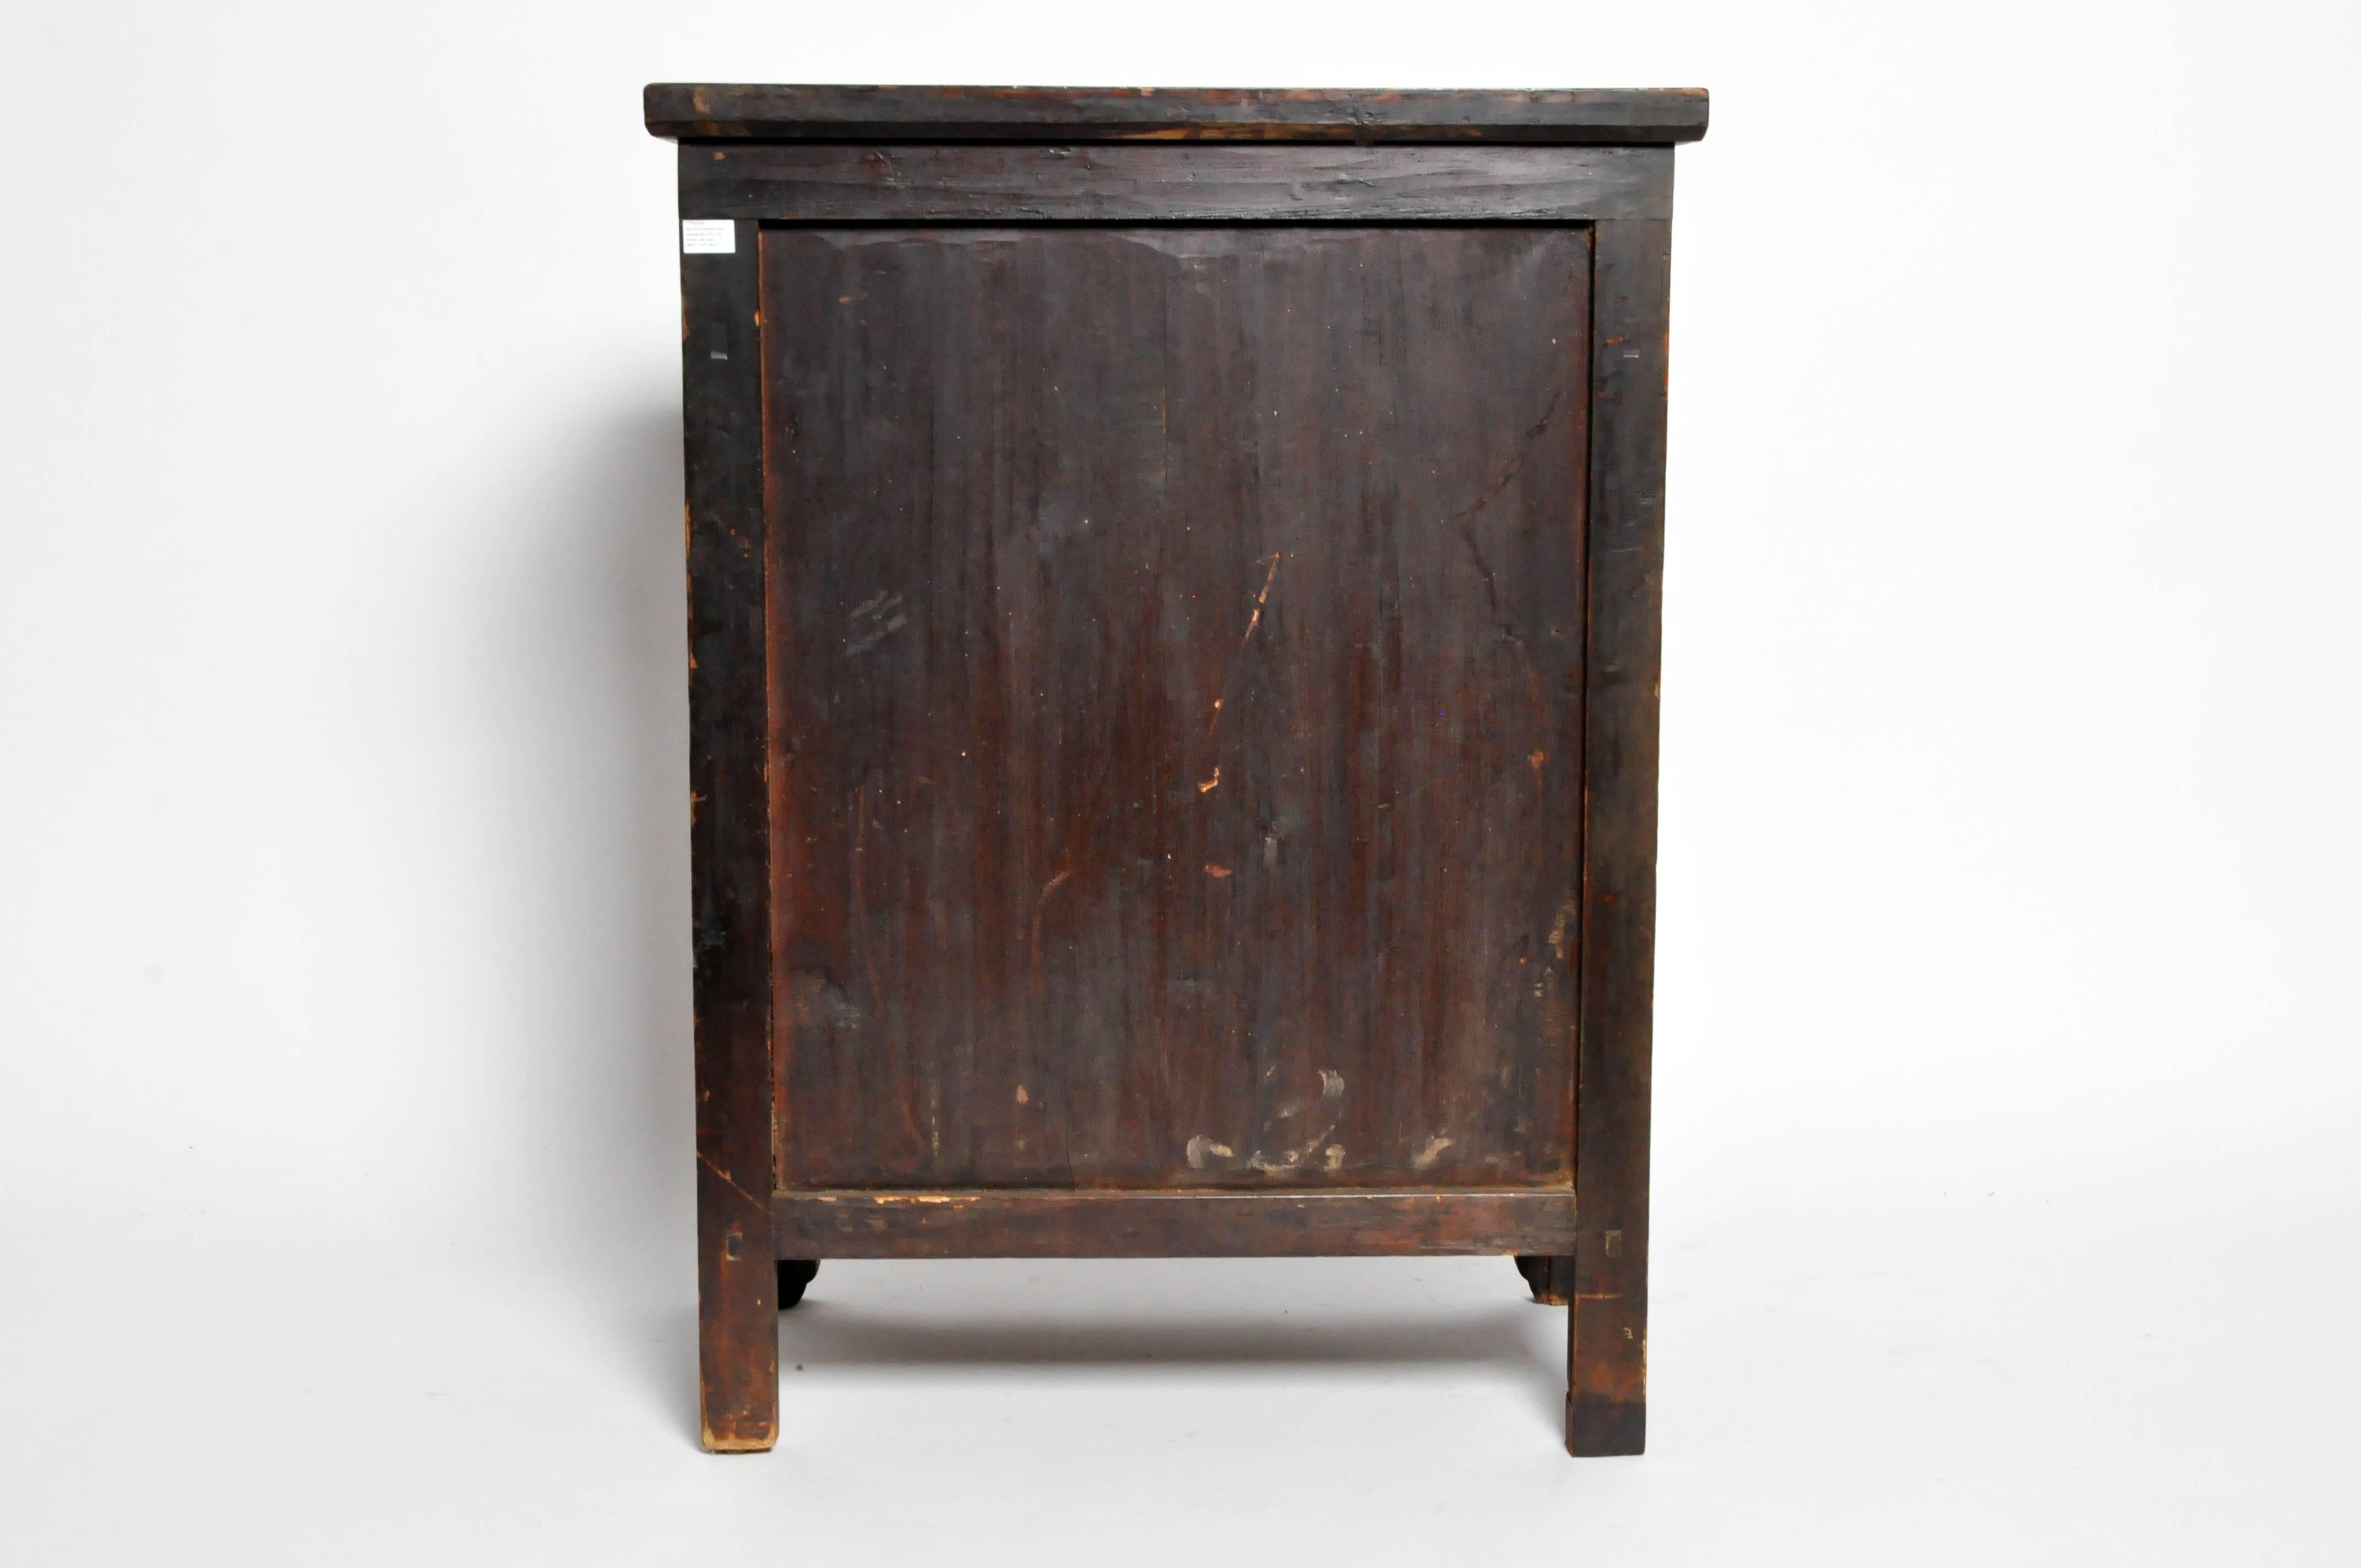 This handsome cabinet is from Gun Zhu, China and was made during the late Qing dynasty. Made from elmwood with a burl front it features two drawers and a shelf inside.